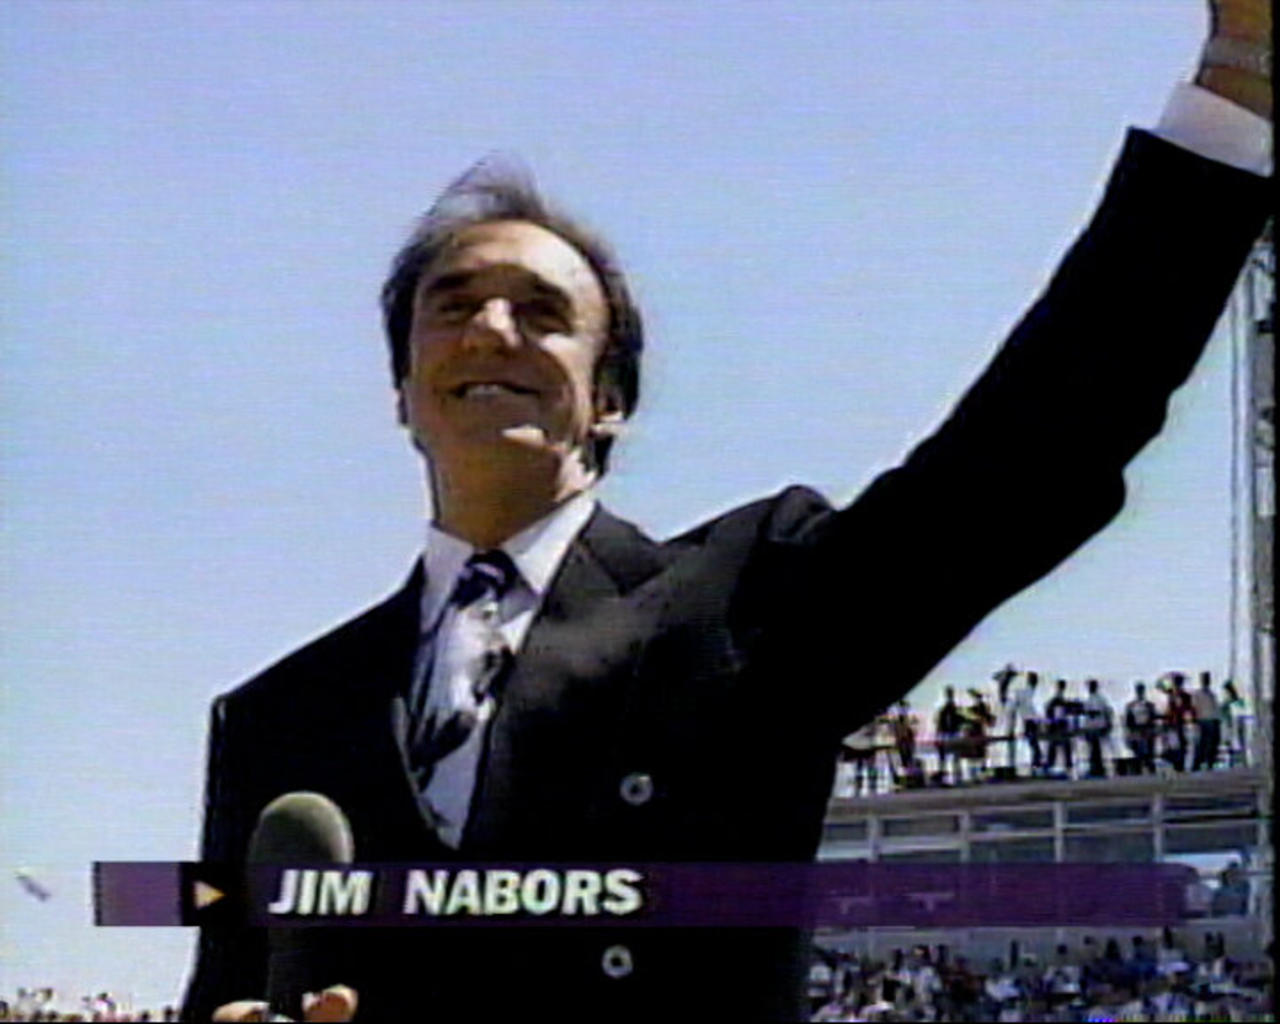 May 29, 1994 - JIm Nabors 'Back Home Again in Indiana'